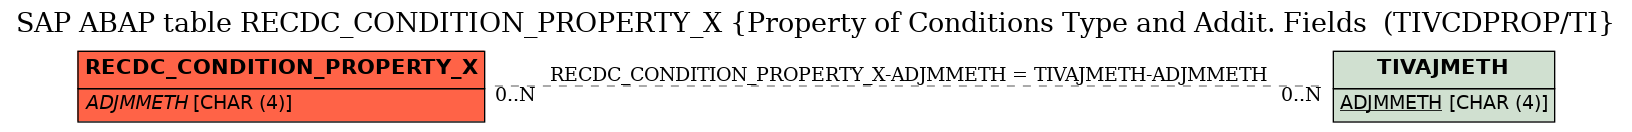 E-R Diagram for table RECDC_CONDITION_PROPERTY_X (Property of Conditions Type and Addit. Fields  (TIVCDPROP/TI)